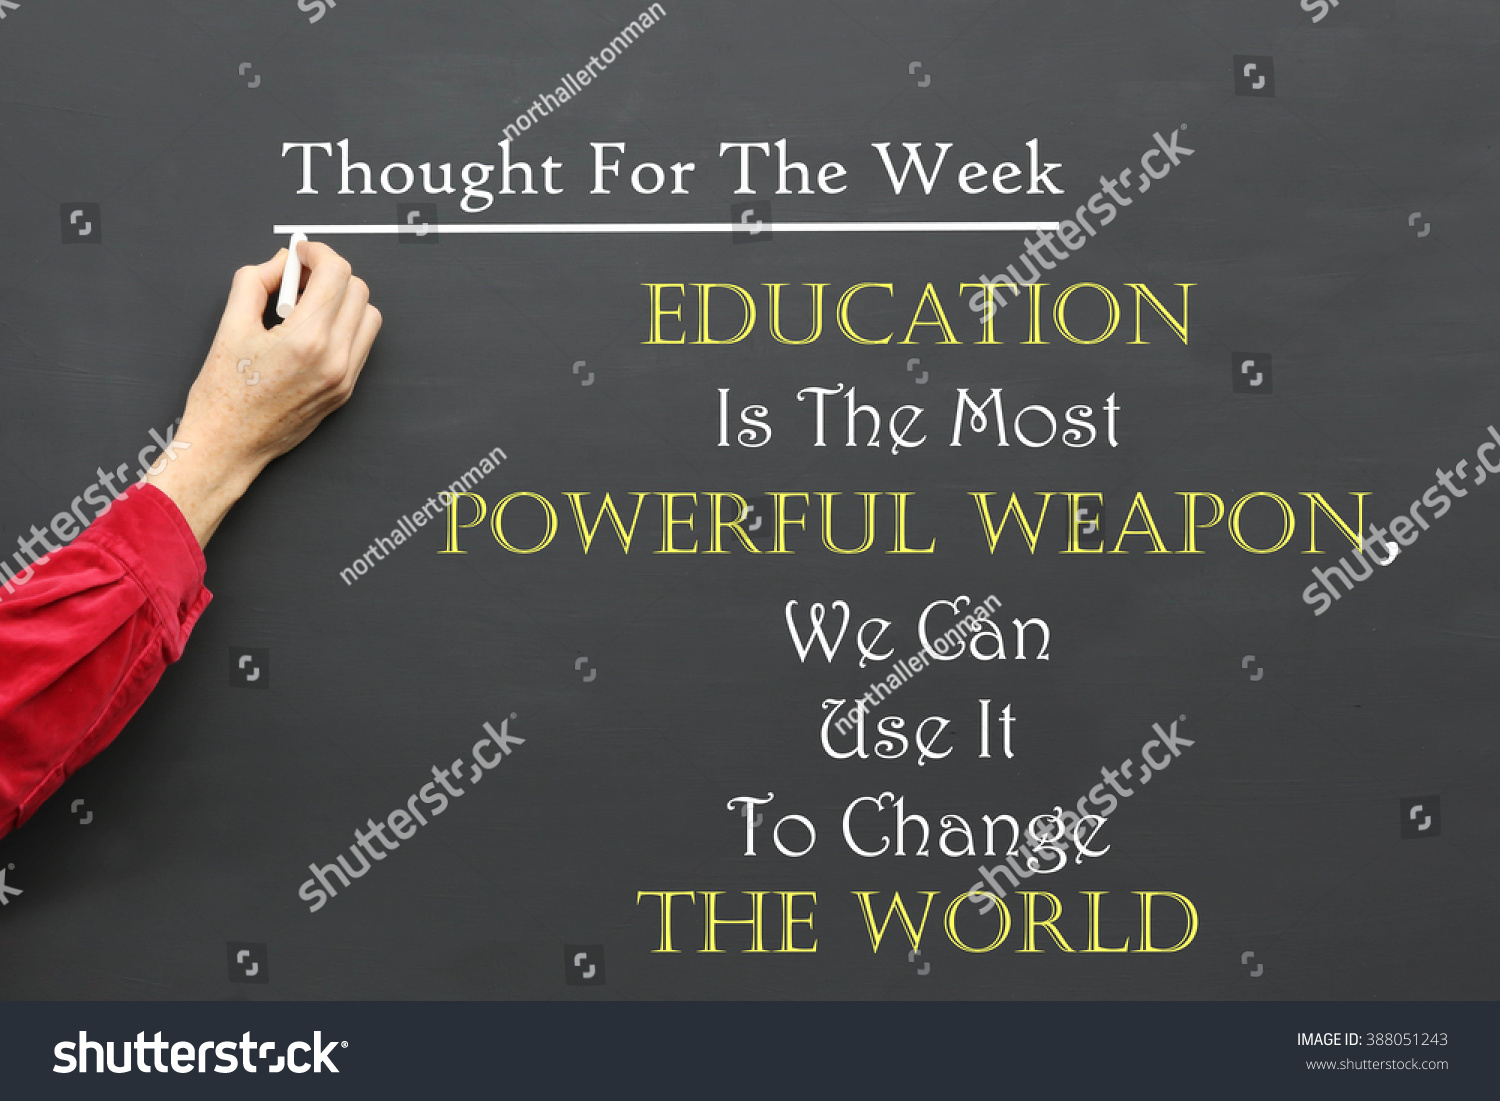 Inspirational Thought For The Day message of Education Is The Most Powerful Weapon, We Can Use It To Change The World written on a School Blackboard by the teacher. #388051243